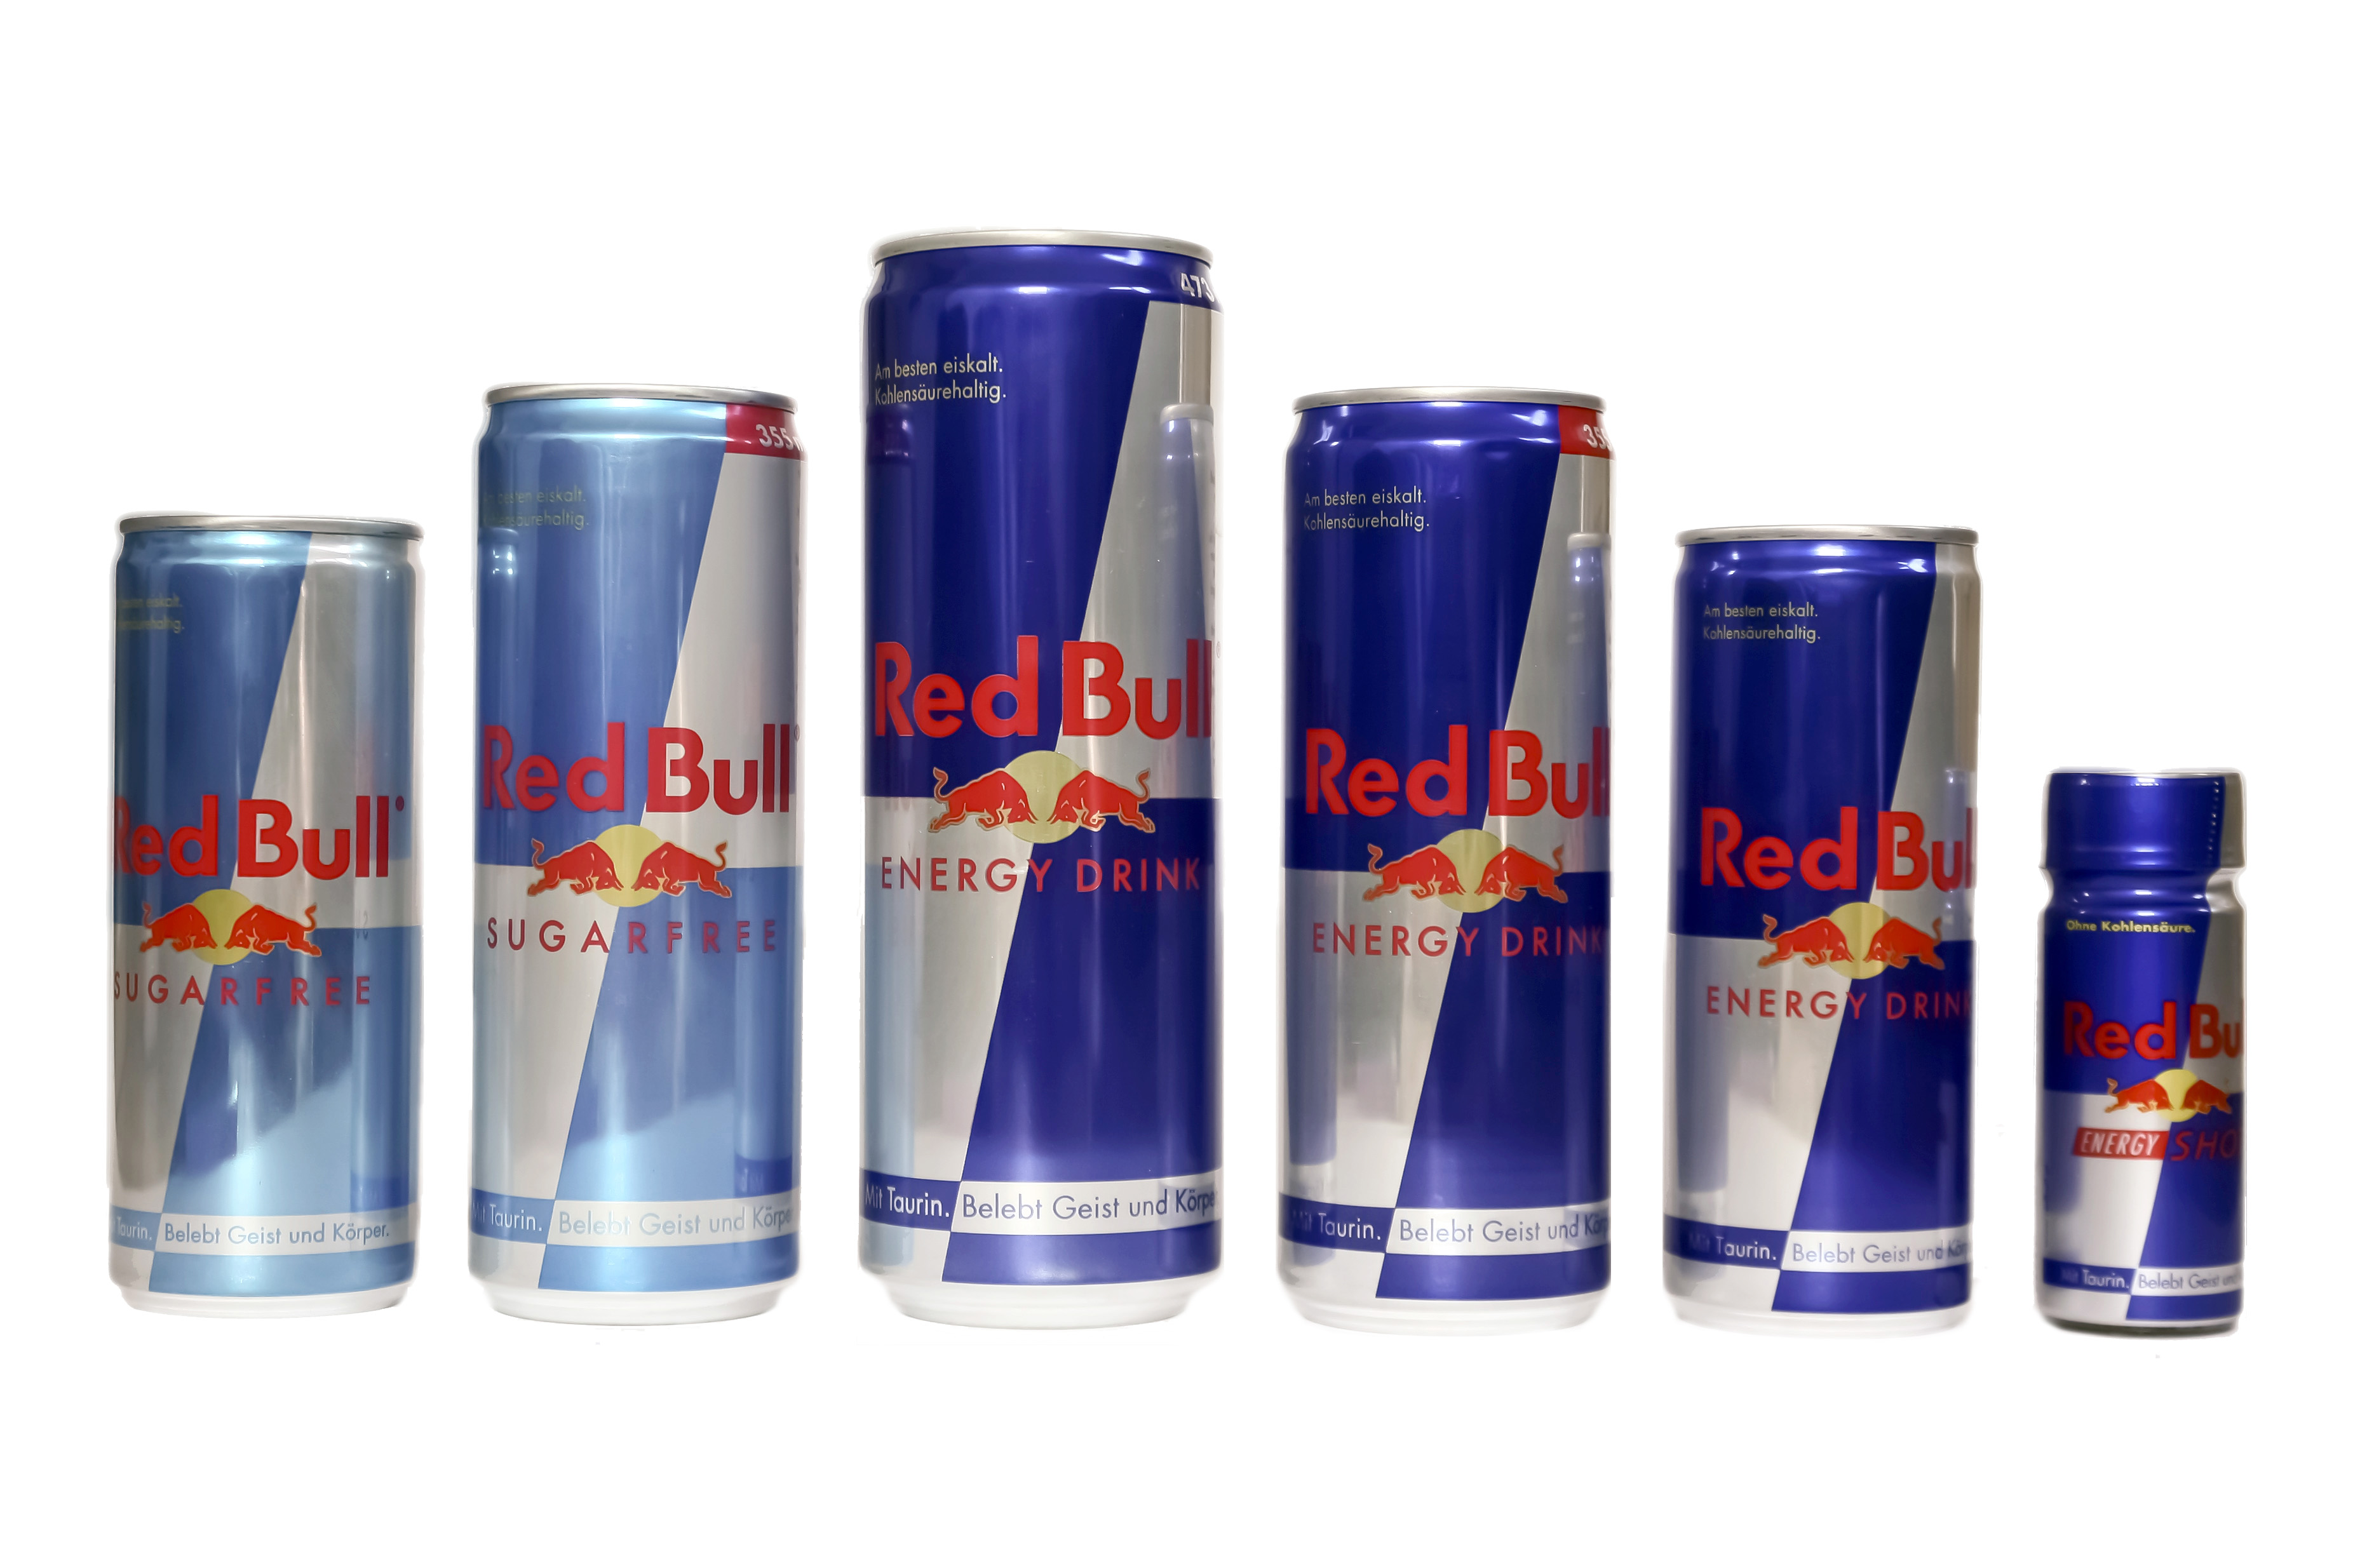 Energy drink and red bull 2 essay